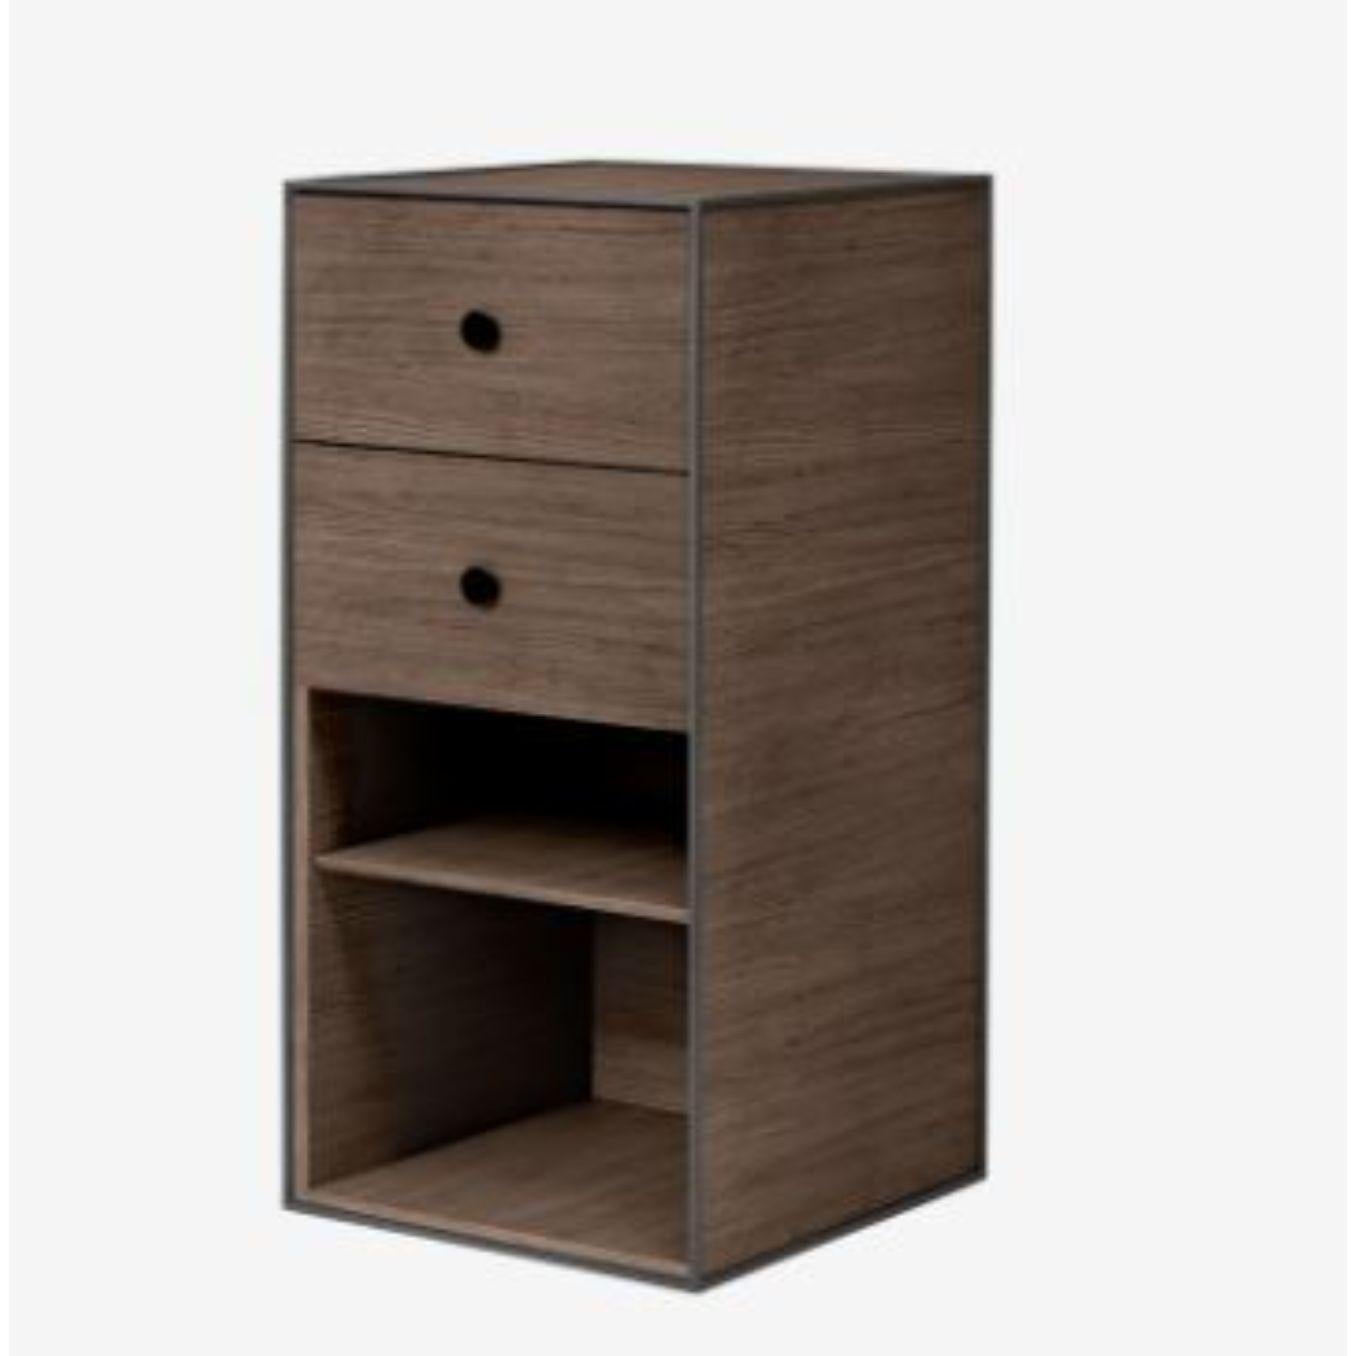 70 smoked oak frame box with shelf / 2 drawers by Lassen
Dimensions: D 35 x W 35 x H 70 cm 
Materials: Finér, Melamin, Melamin, Melamine, Metal, Veneer, Oak
Also available in different colors and dimensions.
Weight: 13 Kg


By Lassen is a